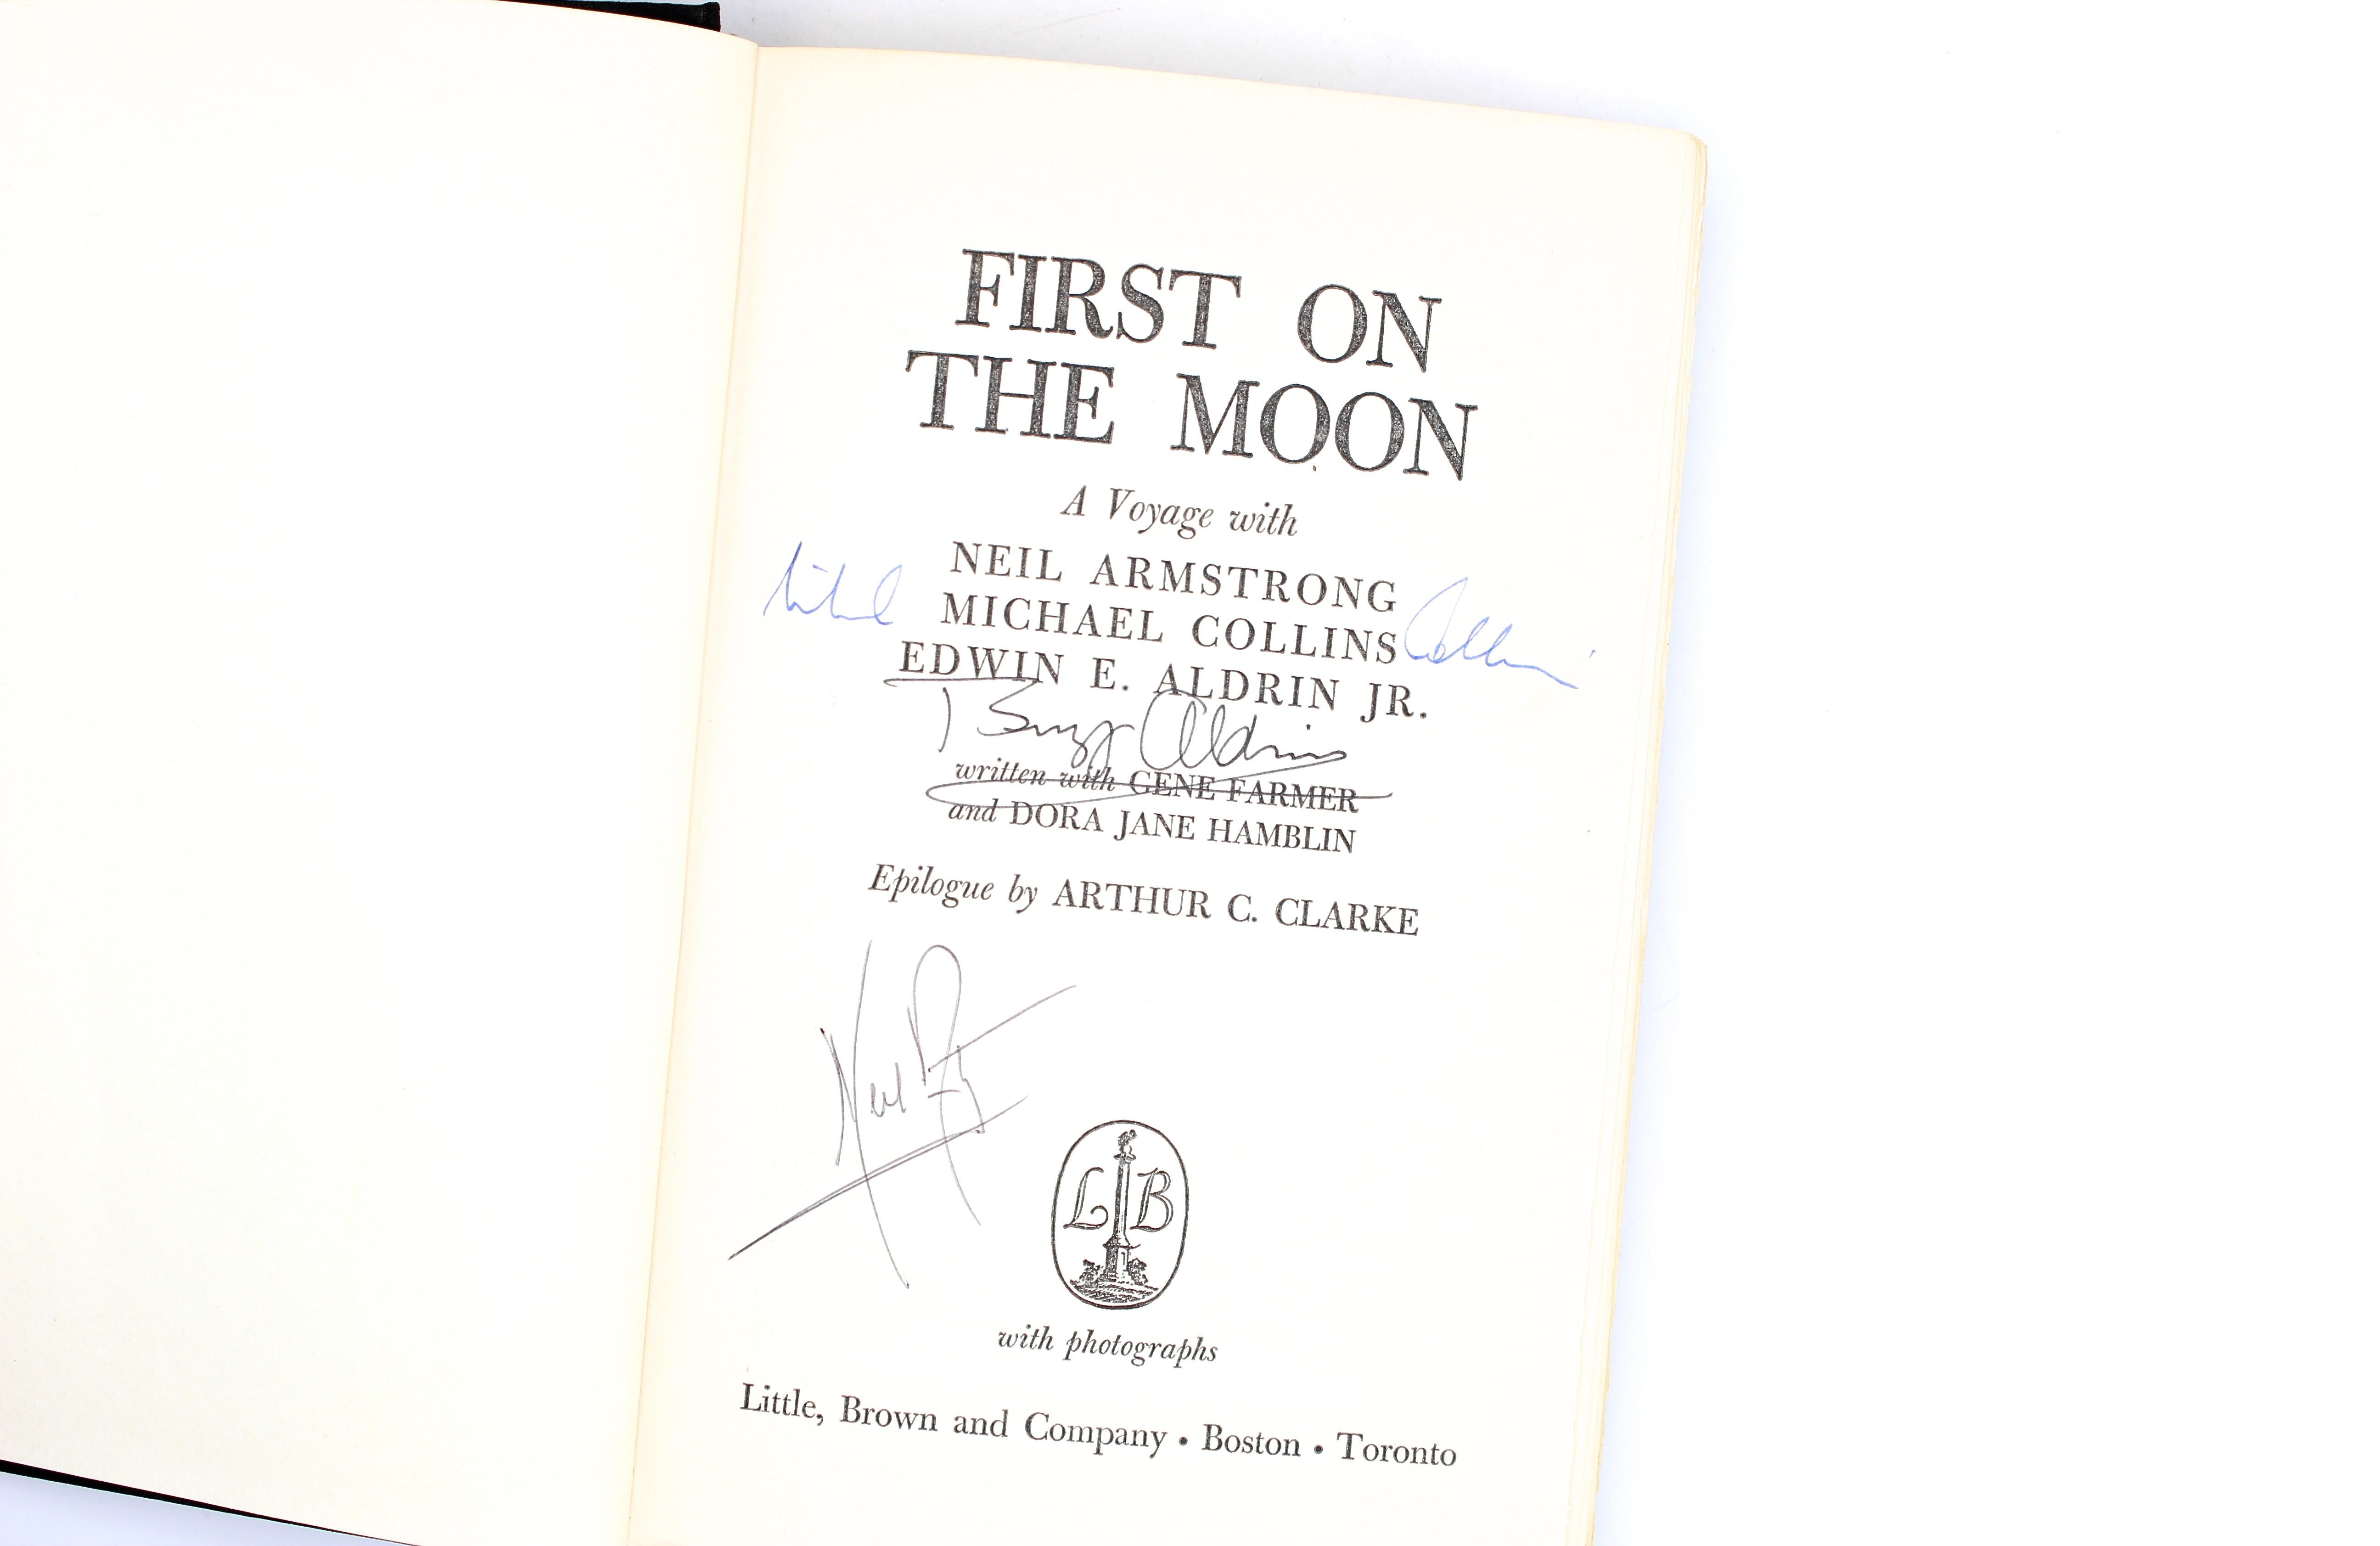 First on the Moon: A Voyage with Neil Armstrong, Michael Collins, and Edwin E. Aldrin Jr. by Gene Farmer and Dora Jane Hamblin.  Signed by Neil Armstrong, Buzz Aldrin, and Michael Collins.  Original dust jacket and presented in a custom leather and